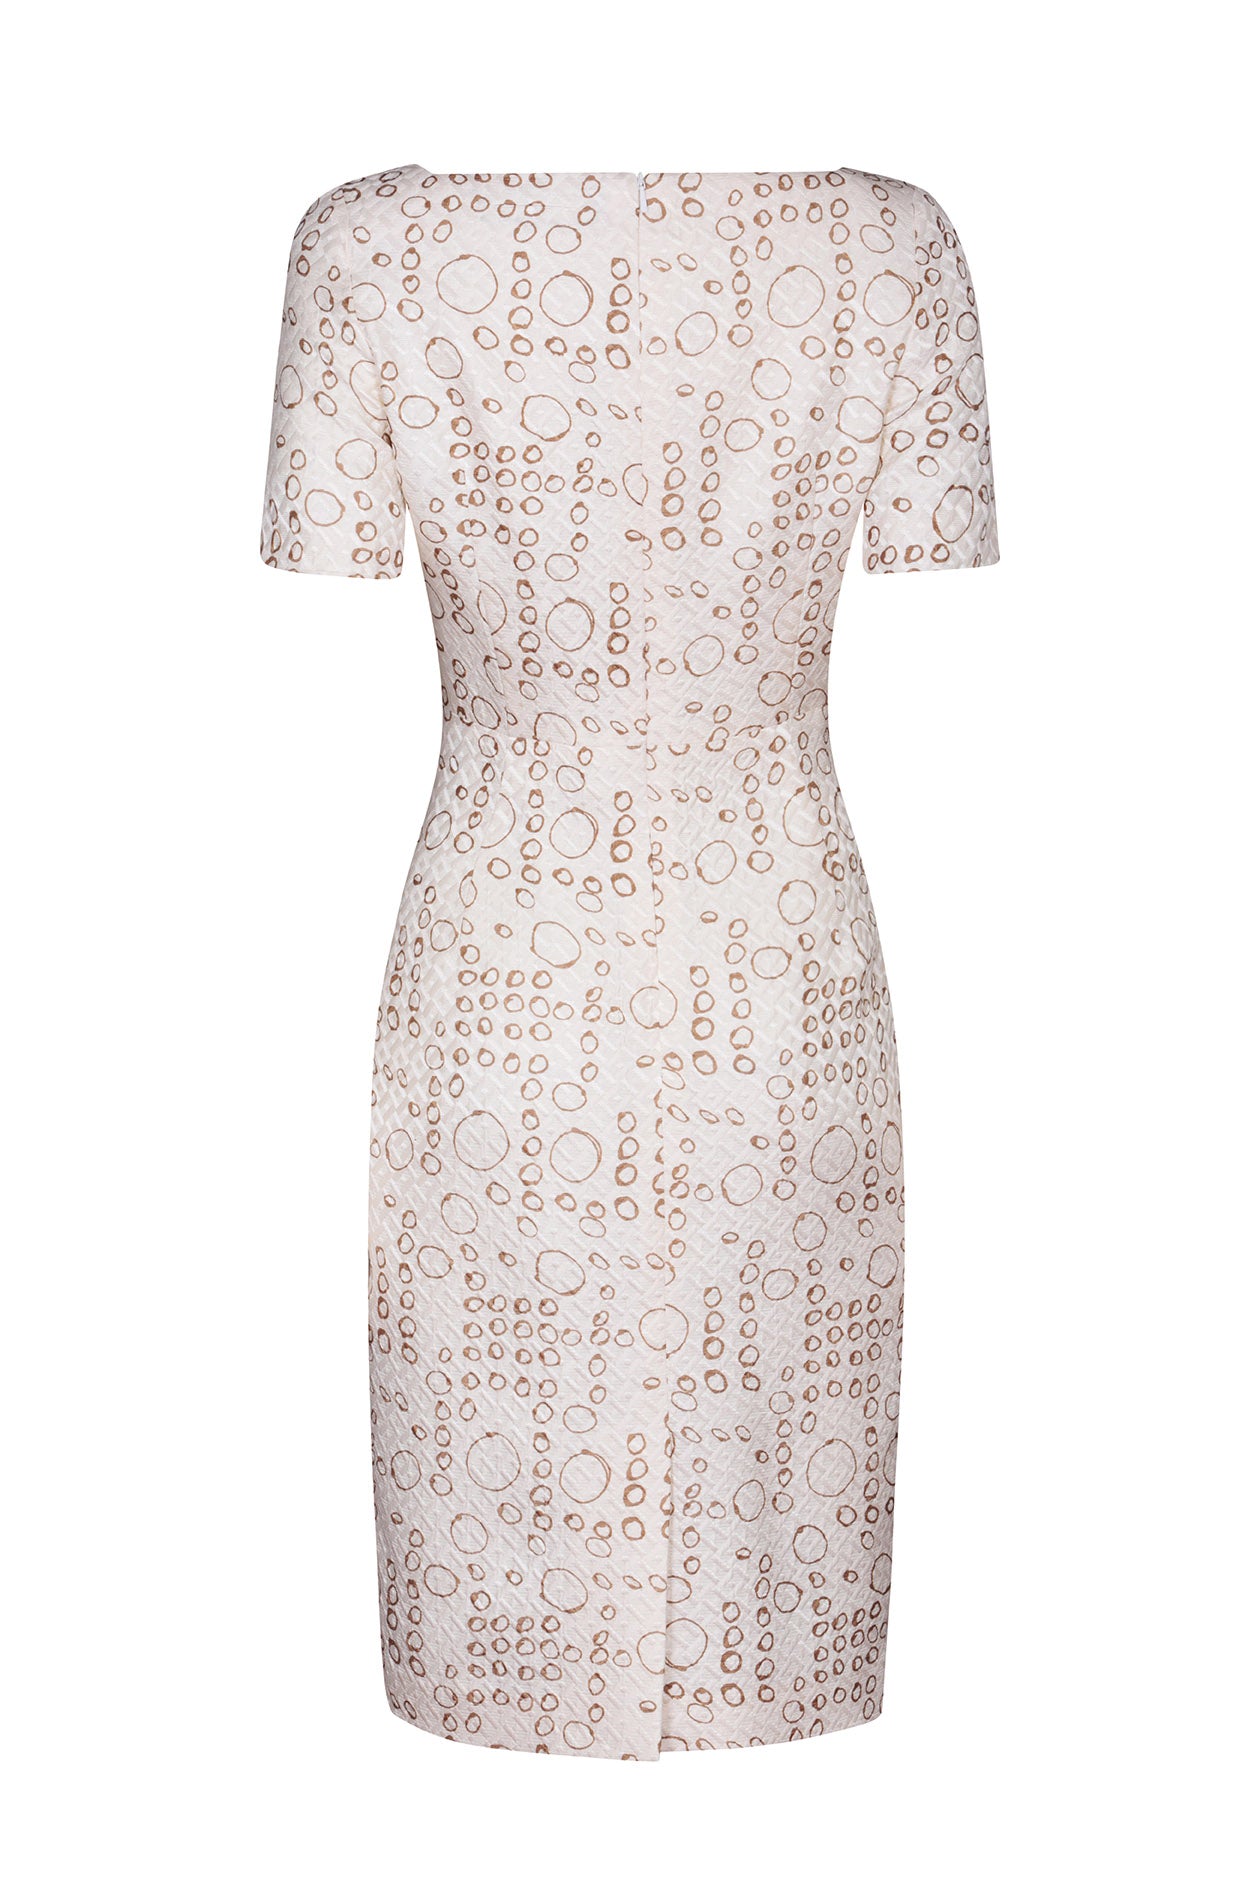 Ivory/Coffee Printed Shift Dress in Silk/Wool Matelassé with Square Neck - Alexa